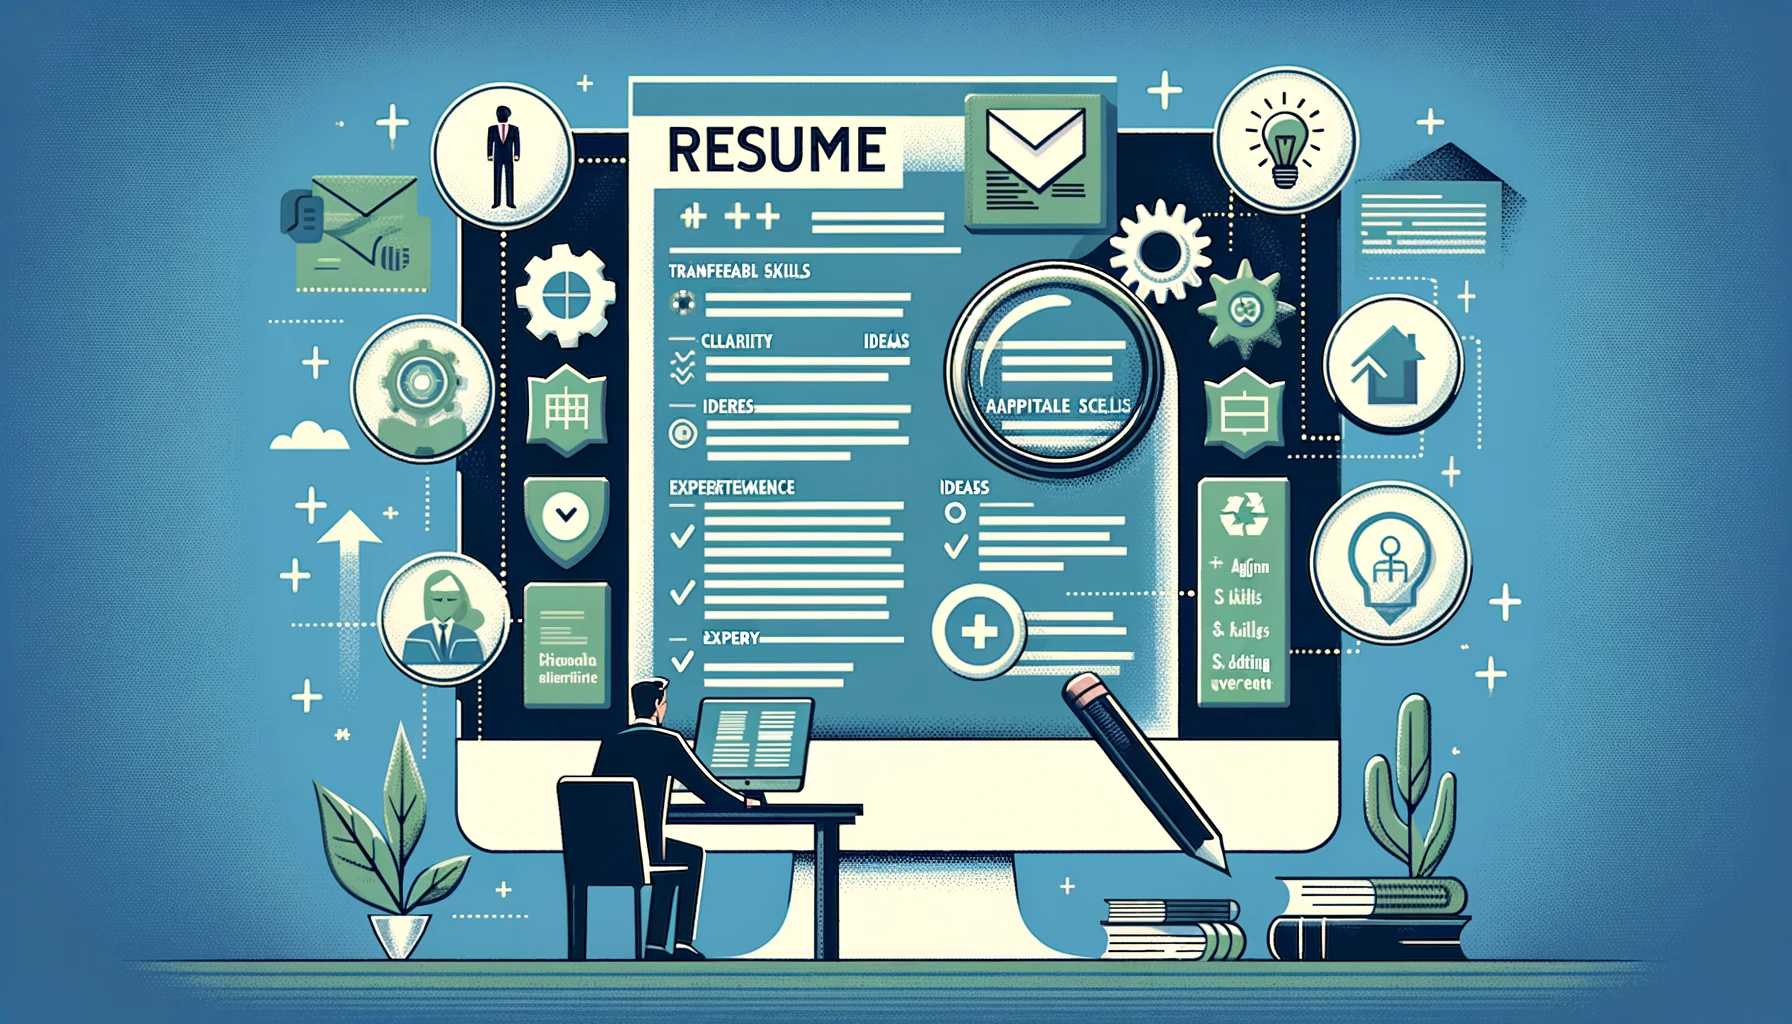 Resume Writing: Strategies for Highlighting Transferable Skills and Experience